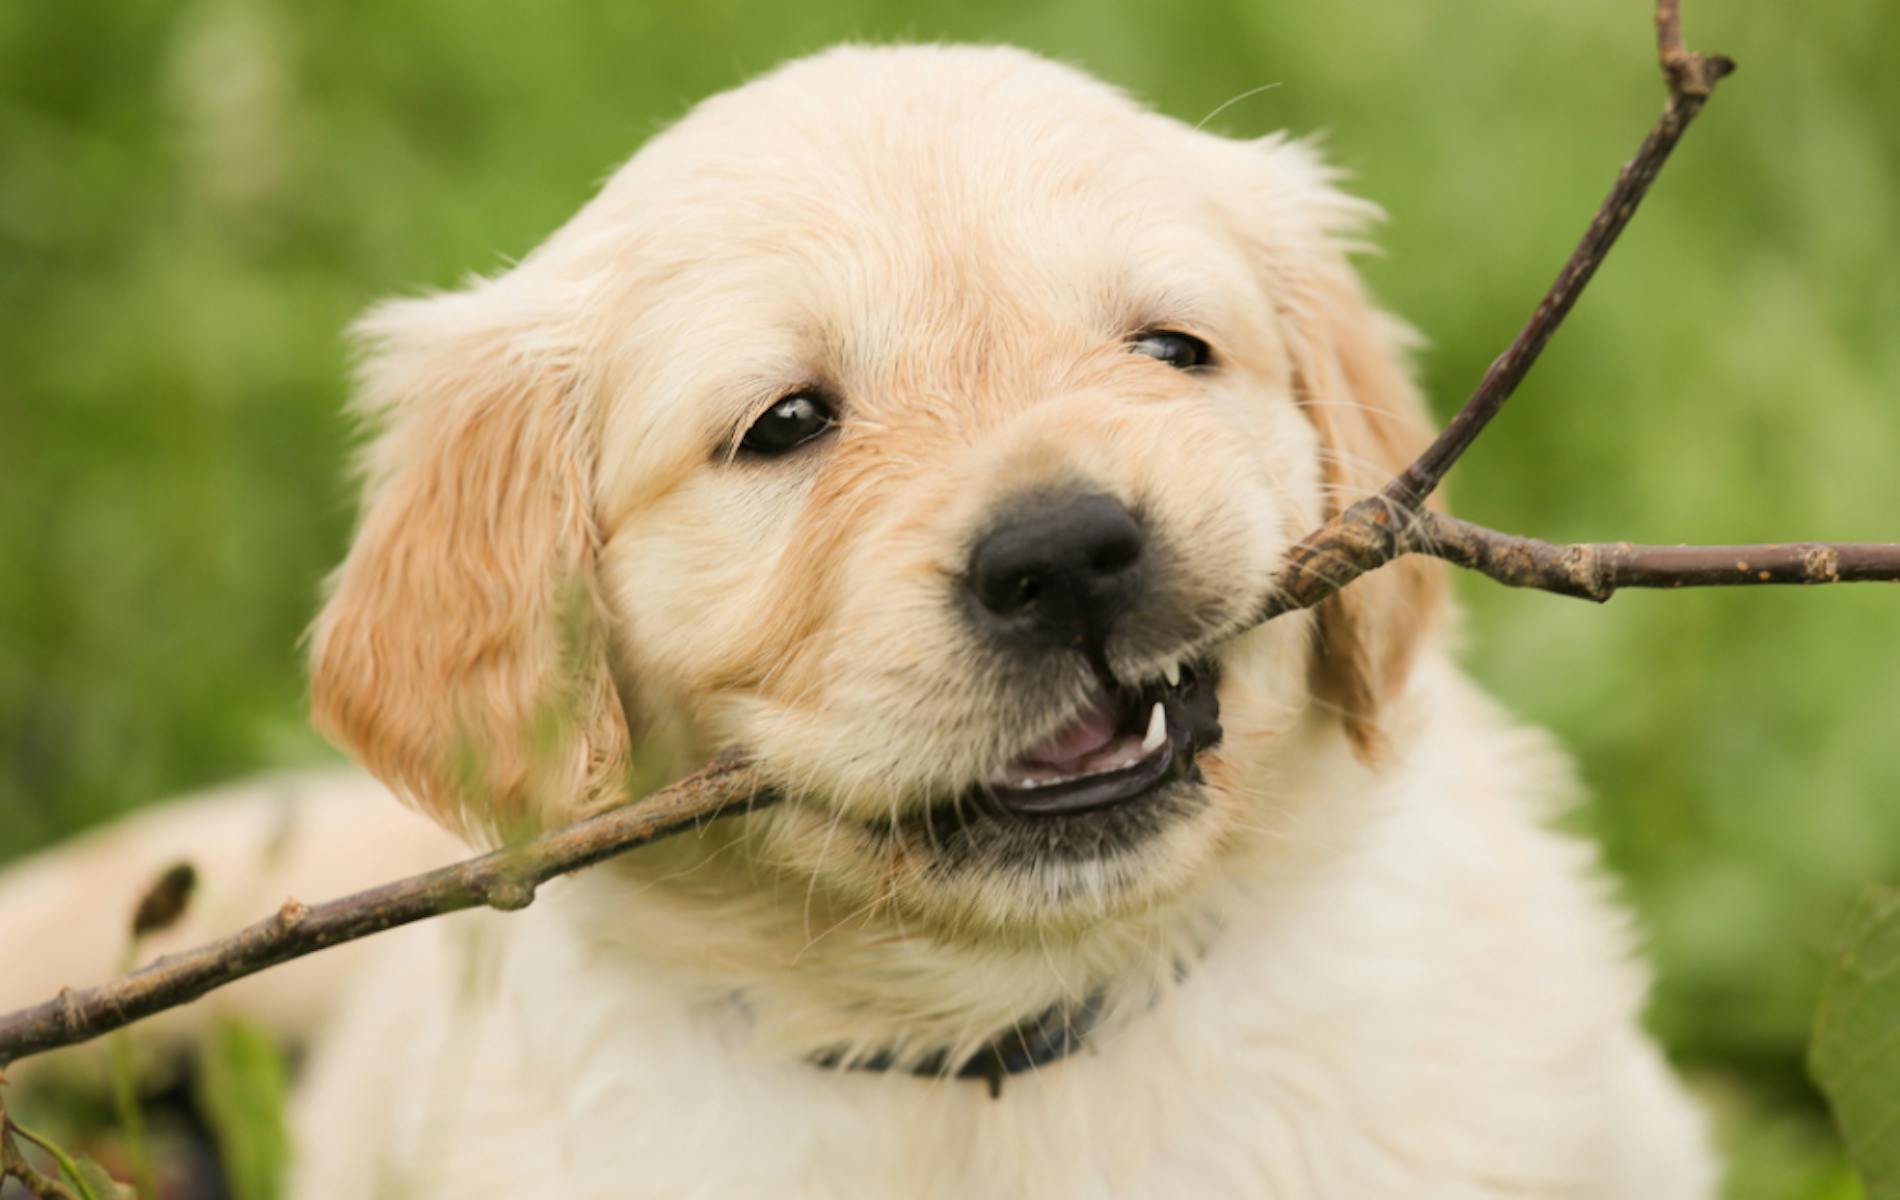 Puppy with stick in its mouth